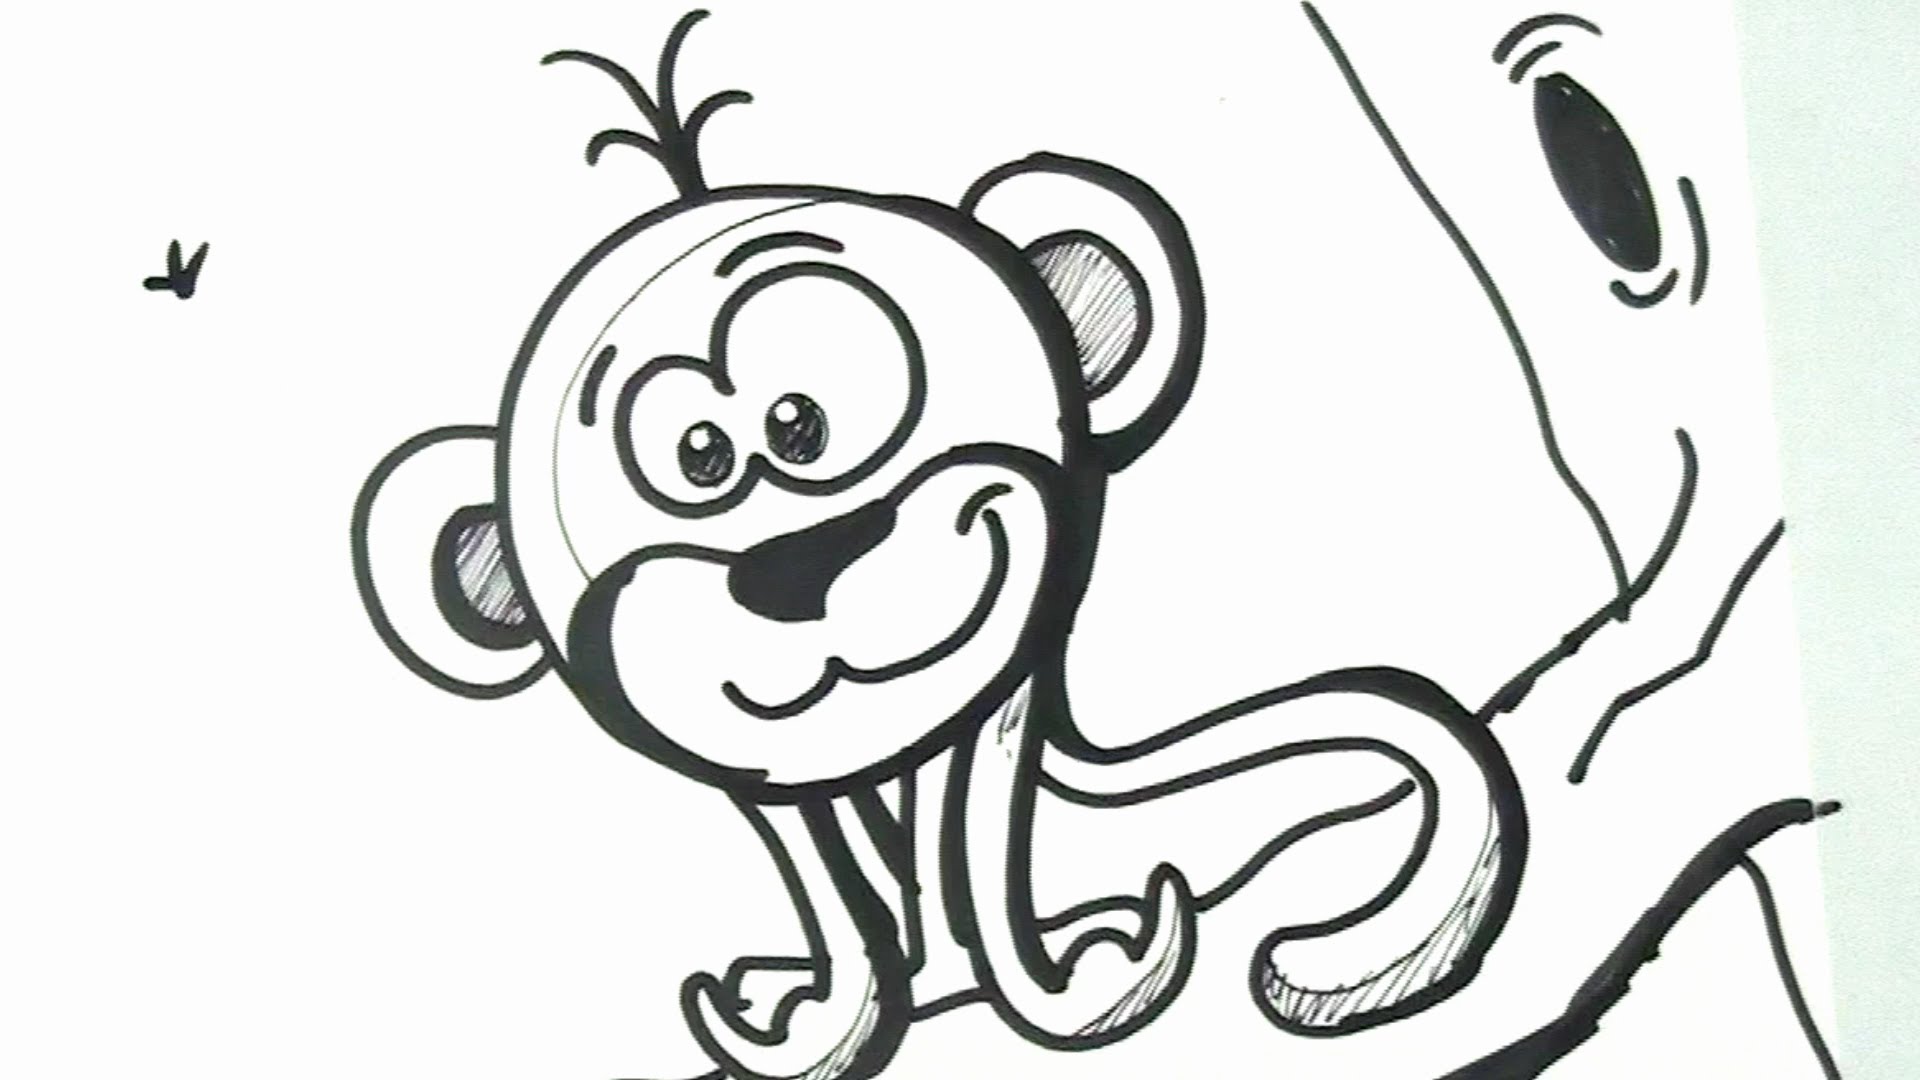 How to draw a Monkey | Drawing for children | Easy Step by Step ...